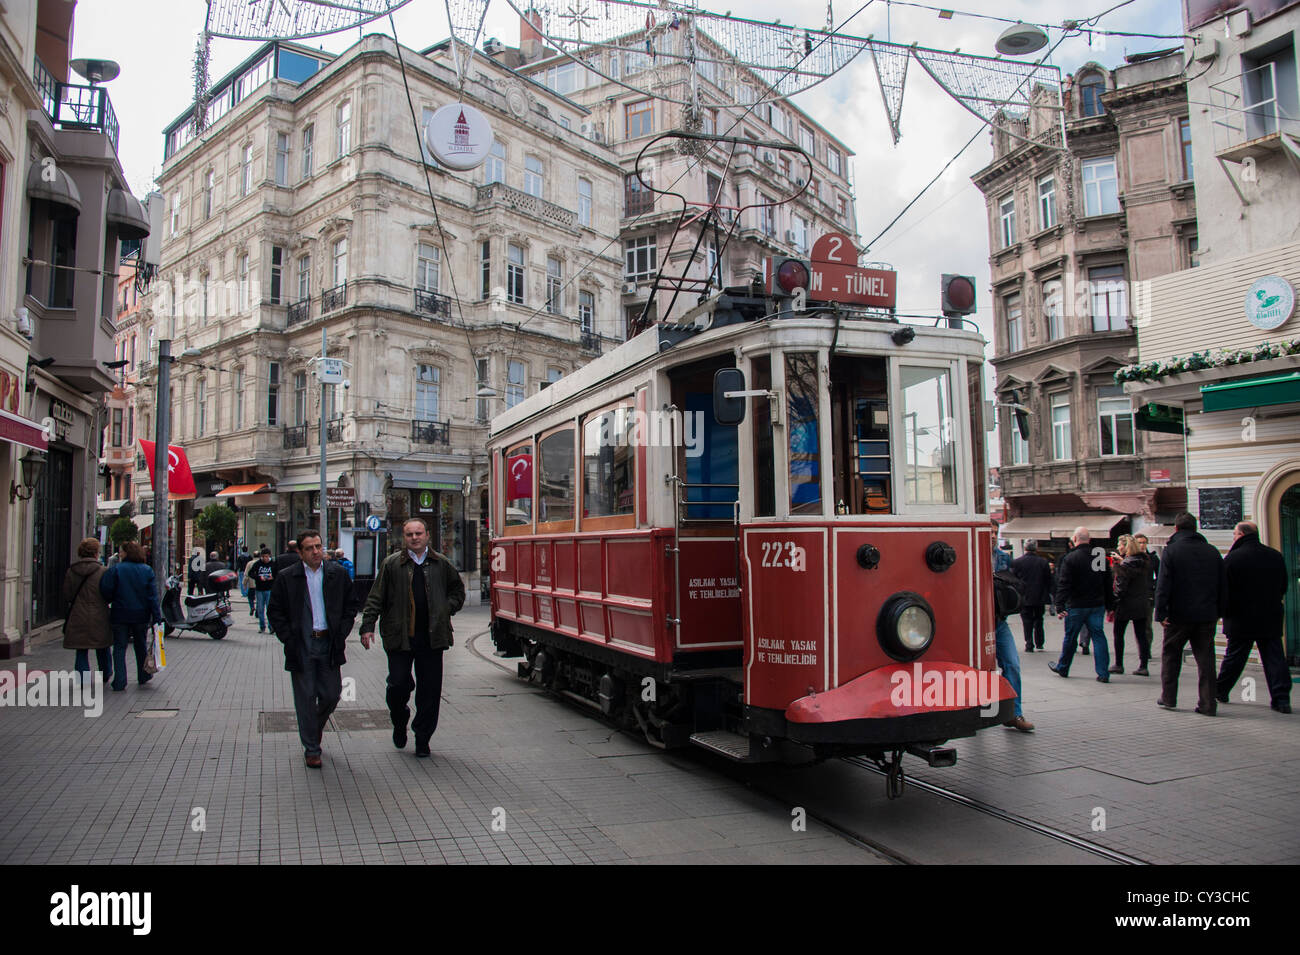 A vintage tram on the shopping street Istiklal Caddesi in modern Istanbul Stock Photo